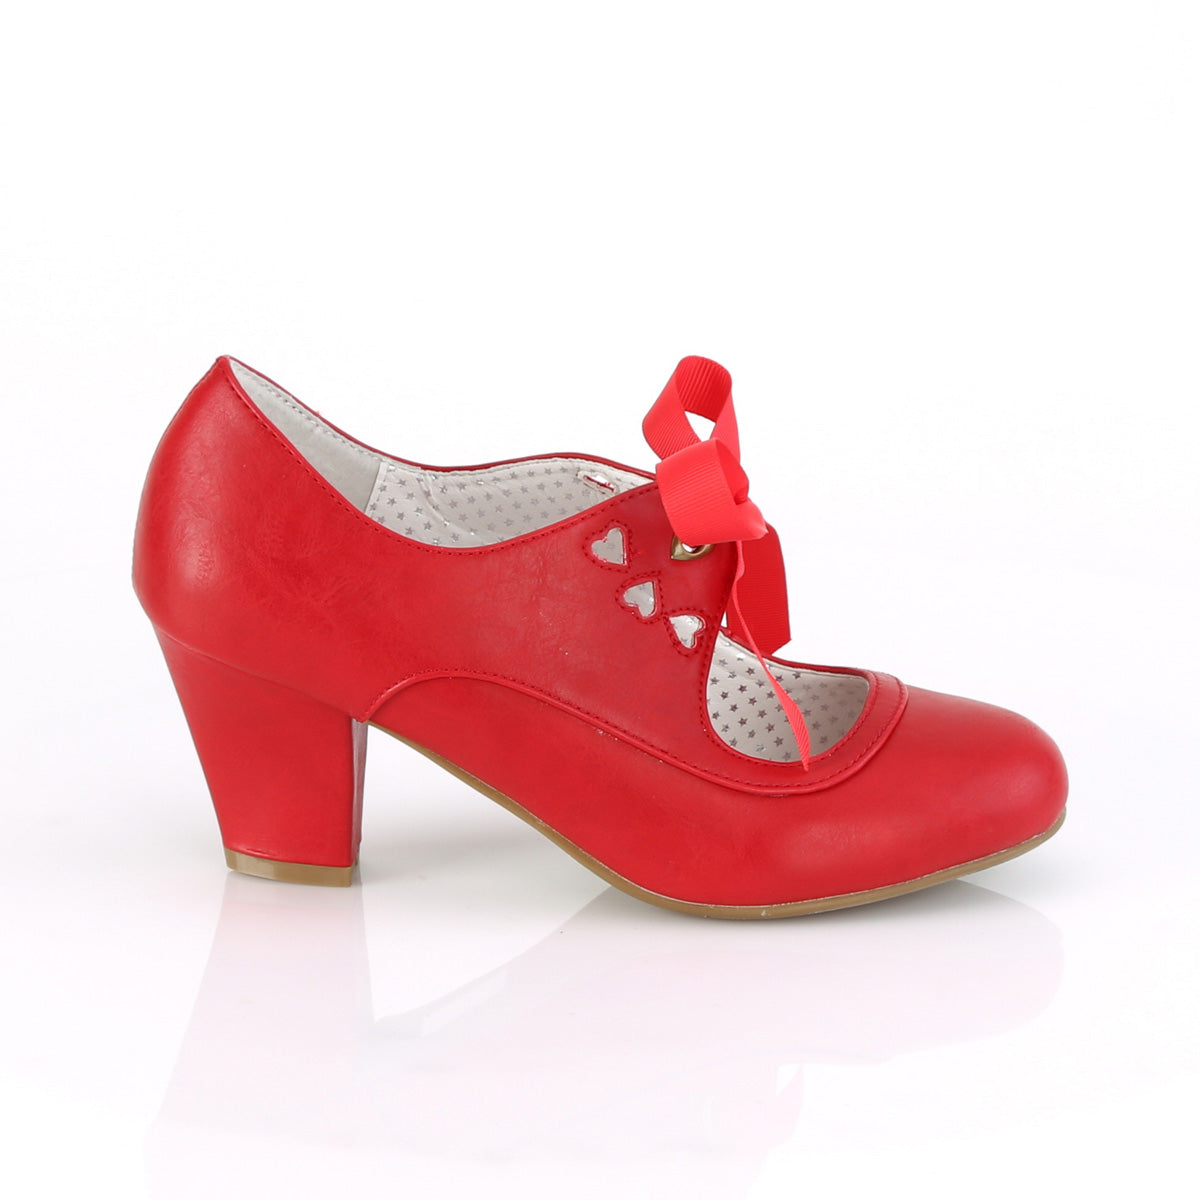 WIGGLE-32 Pumps Heel Red Multi view 2